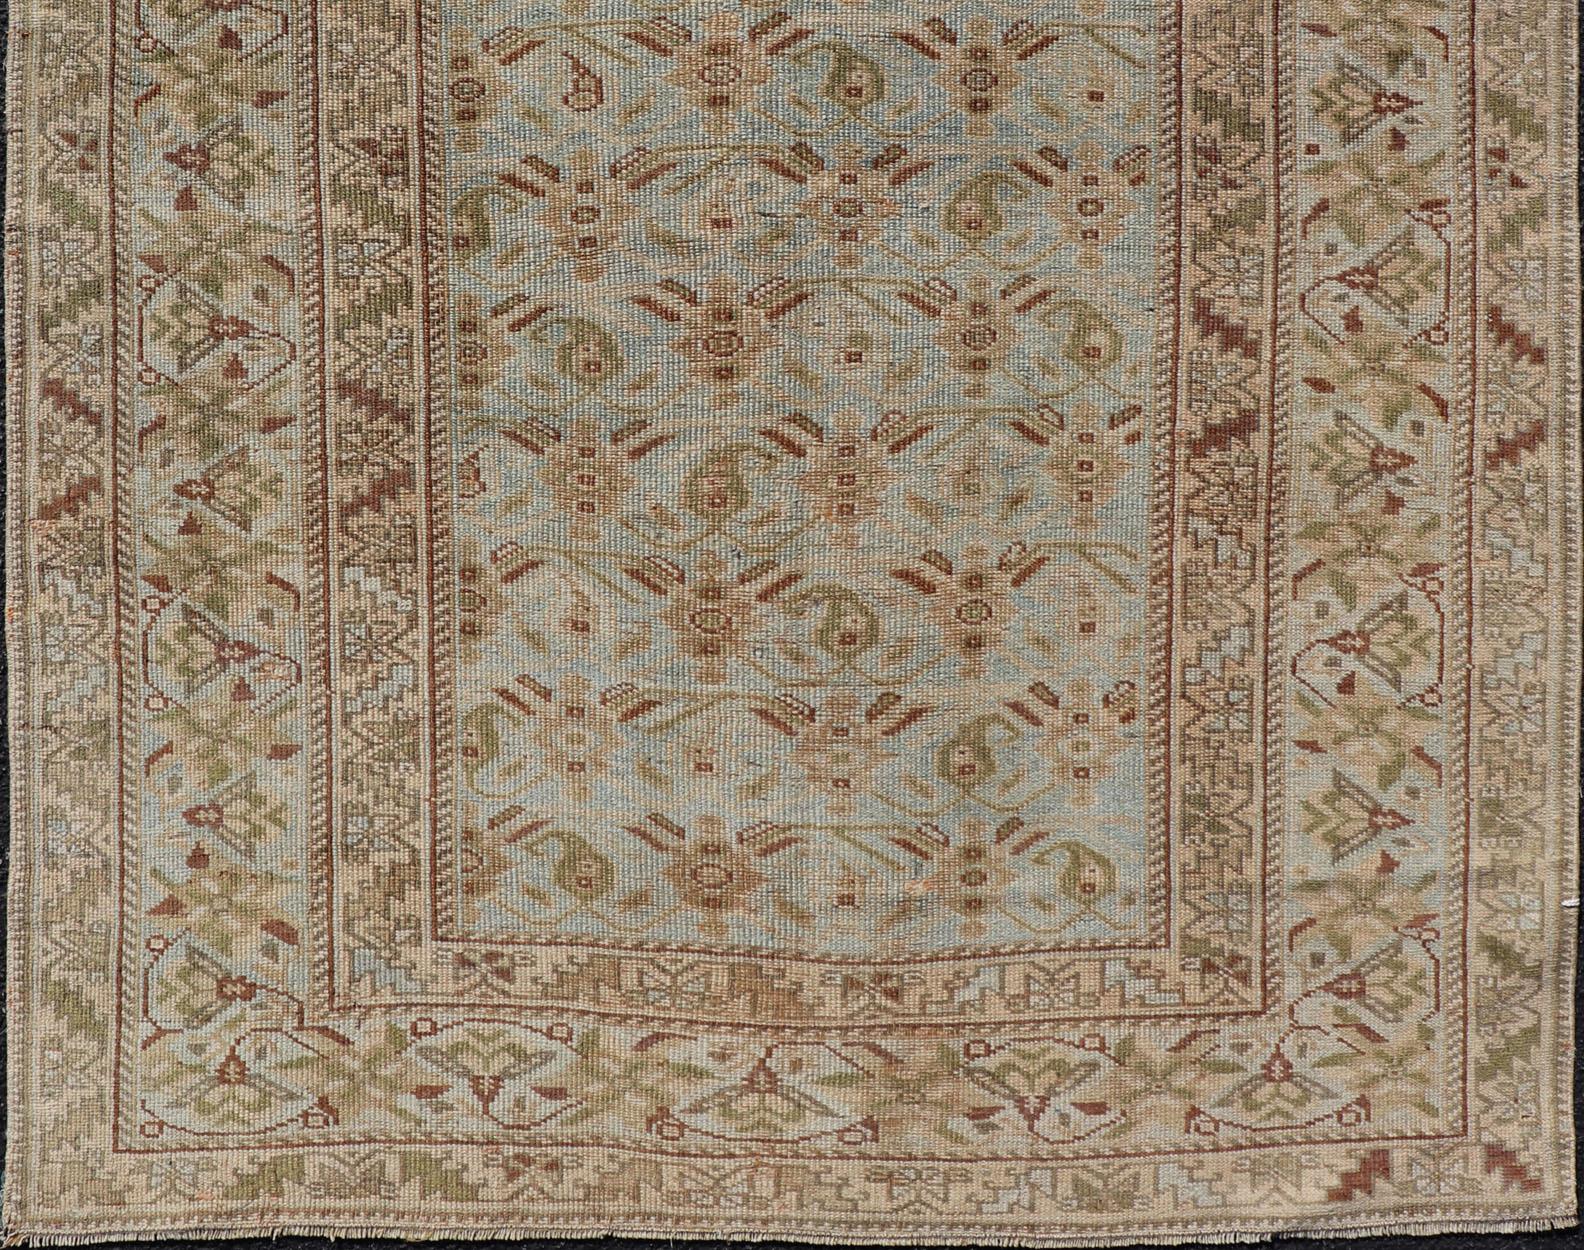  Fine Persian Antique Afshar Rug in Green, Browns, and Blue Tribal Carpet  For Sale 2